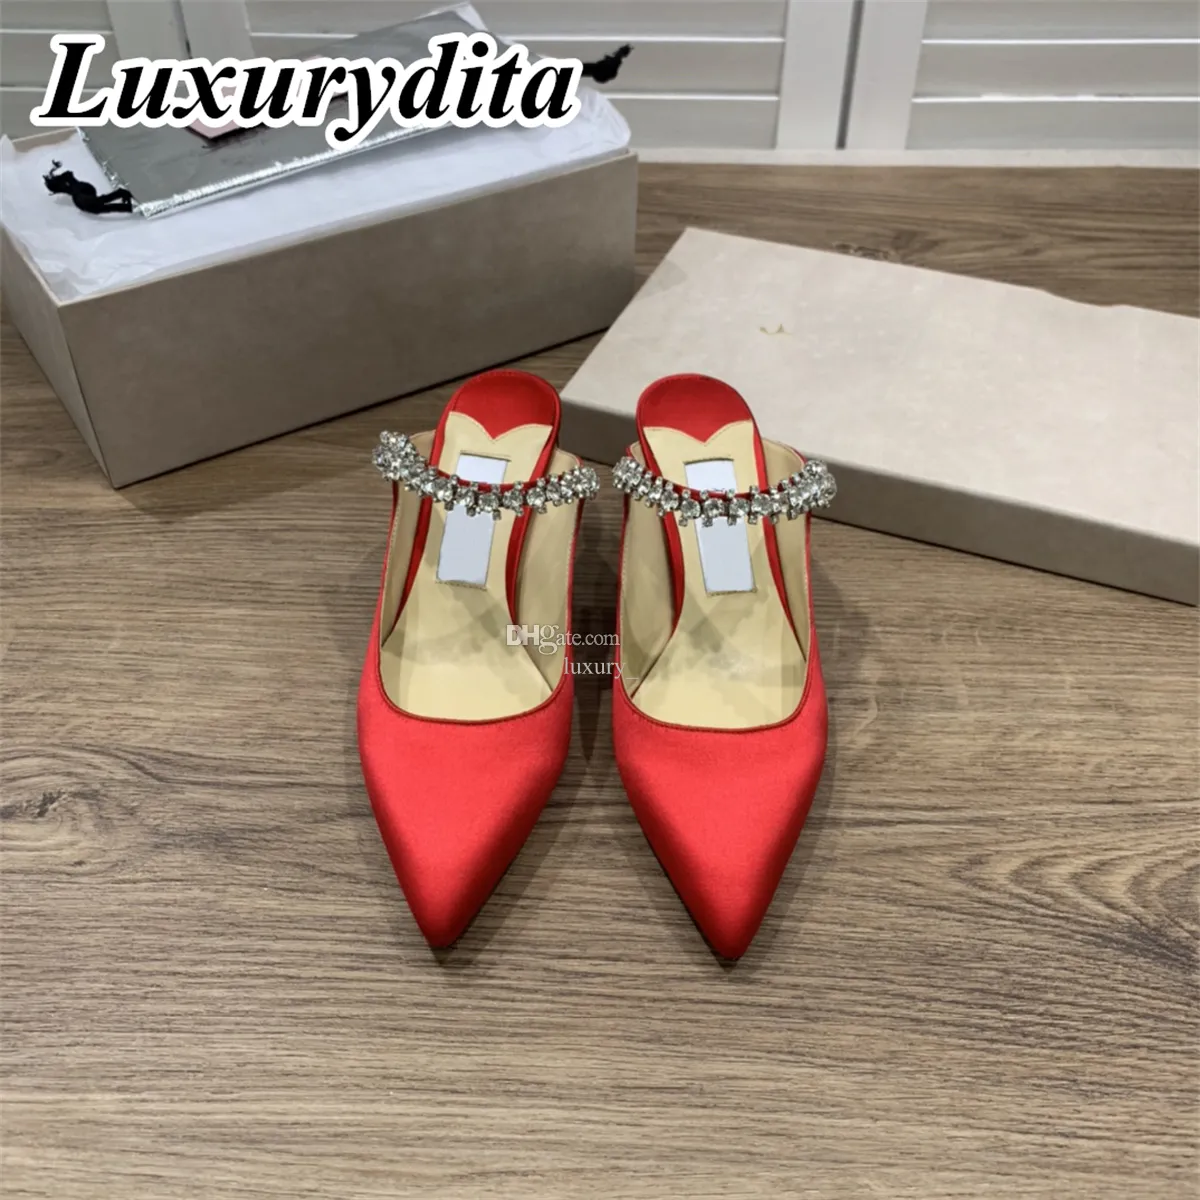 Catwalk Club Sexy High Heel Dansko Dress Shoes For Women 6.3 Inches, 16cm  Point Toe, Fetish Plus Size Pumps From Pianola, $51.35 | DHgate.Com